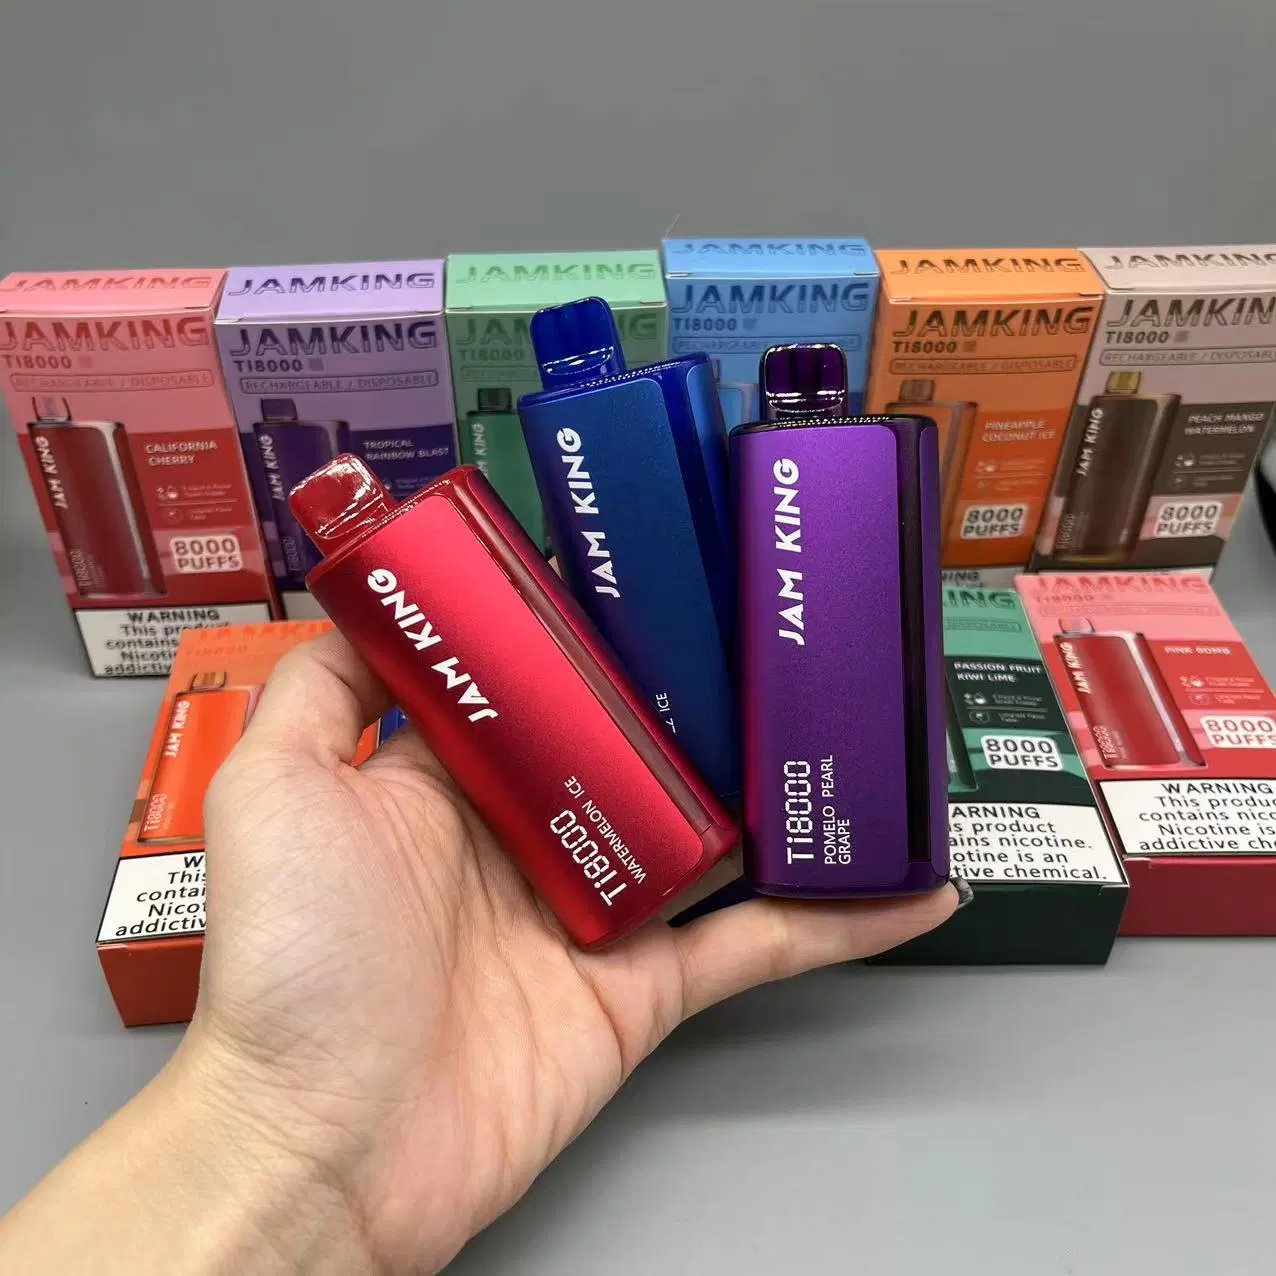 Newest Vape Jam King Ti8000 600mAh Battery E Cigarette 19ml Capacity 8000 Puffs 0% 2% 5% Nicotine Rechargeable Disposable/Chargeable Vape Multi Flavored Vapor